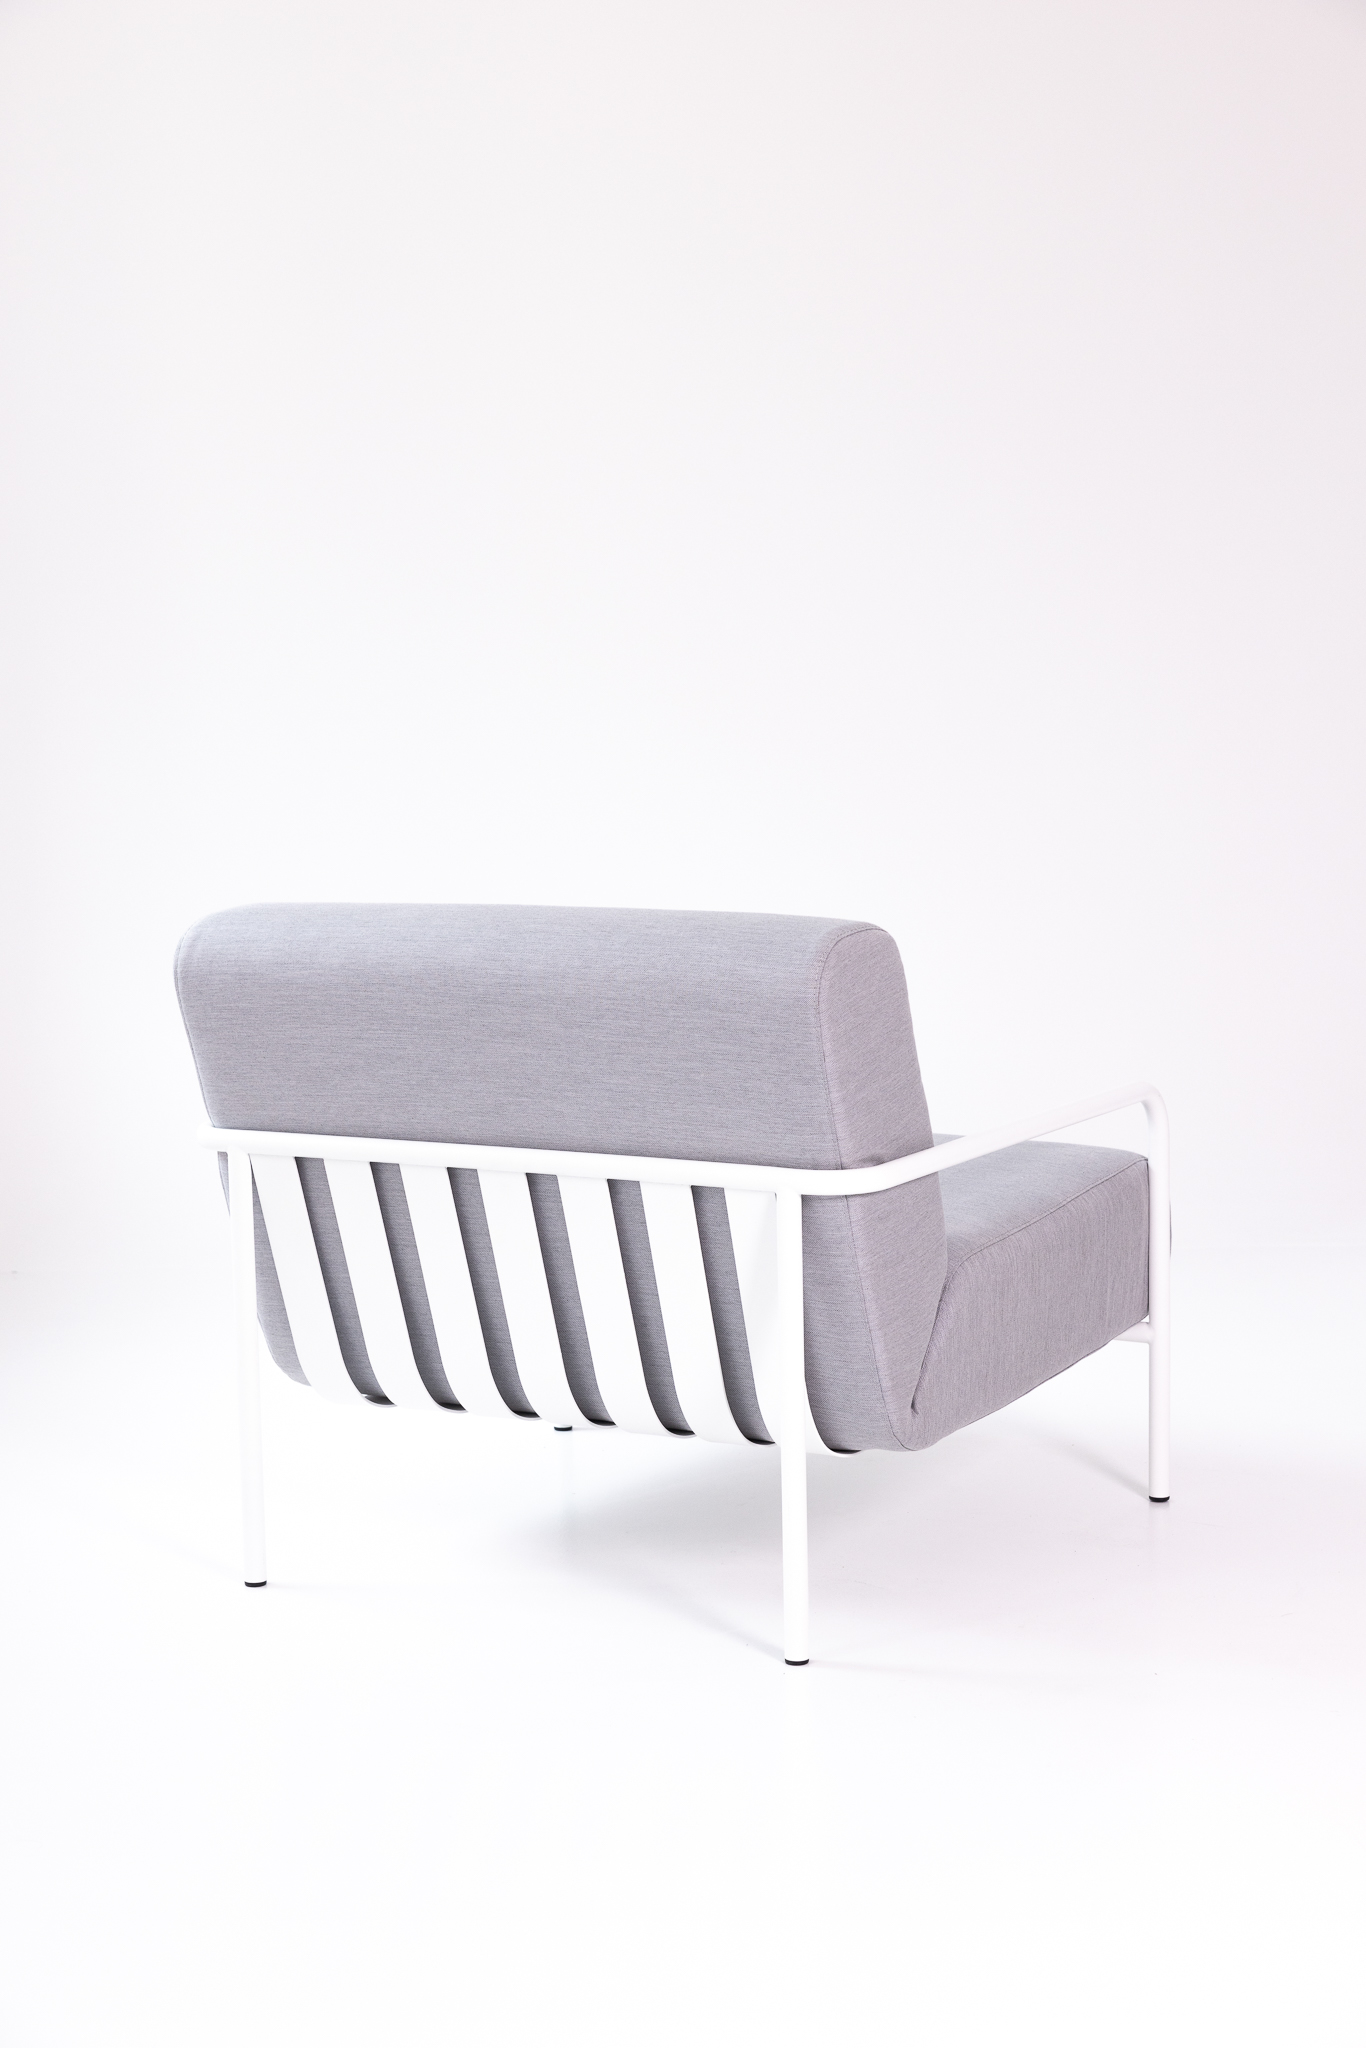 METALLBUDE // SOLEA - OUTDOOR LOUNGE CHAIR | WHITE - LIGHT GRAY CUSHION